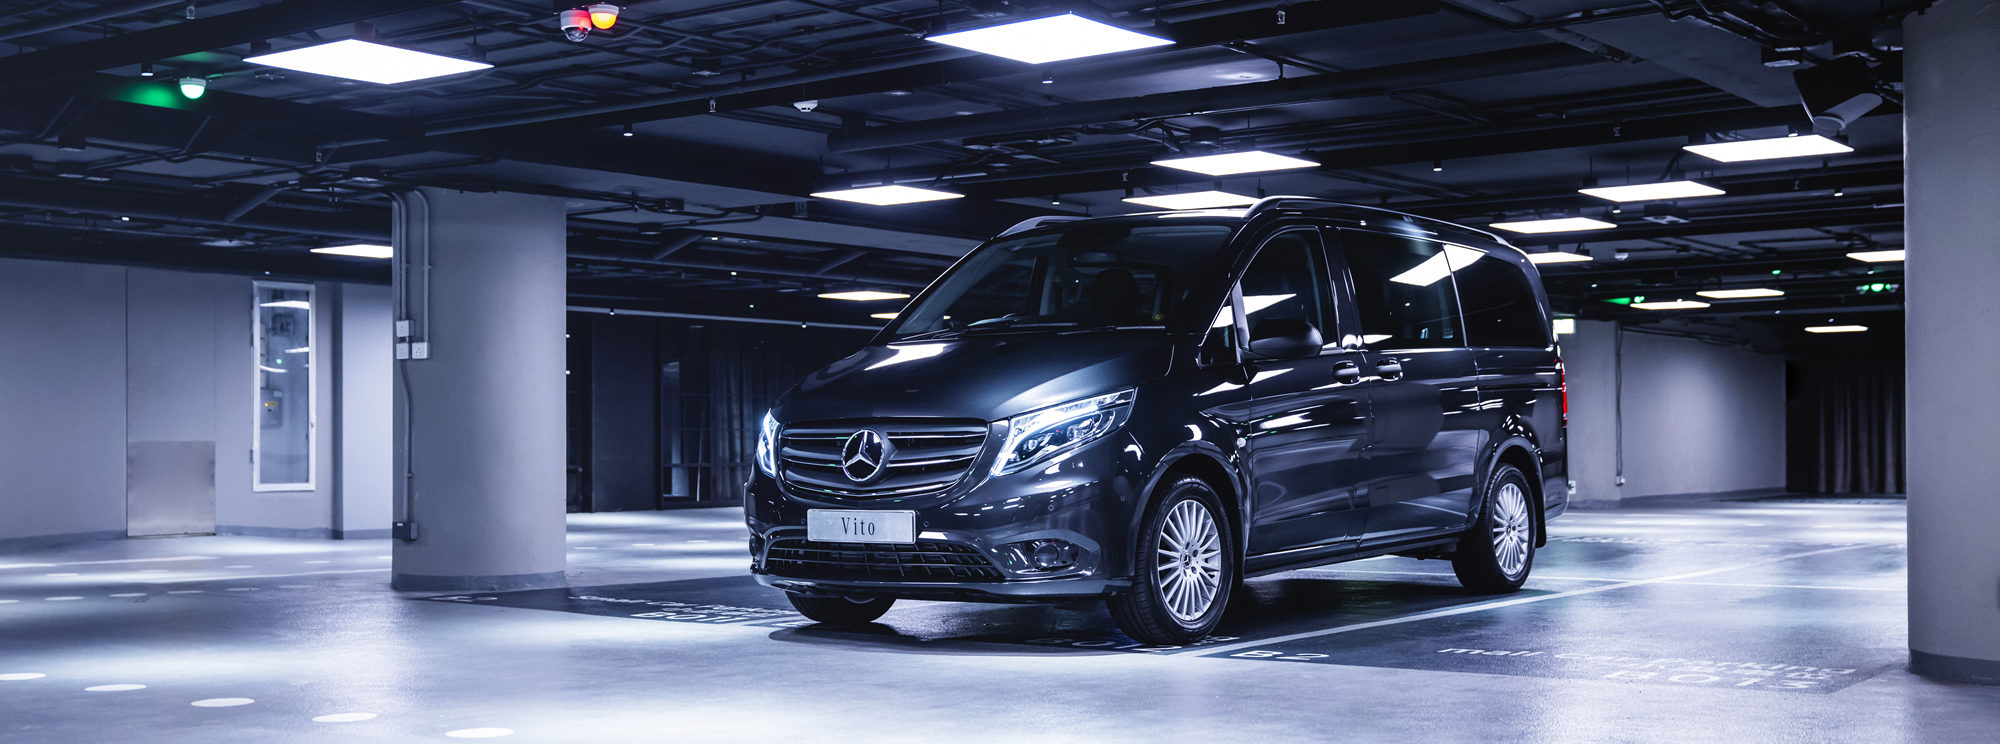 Sign up now for the latest information on Mercedes-Benz Commercial Van!